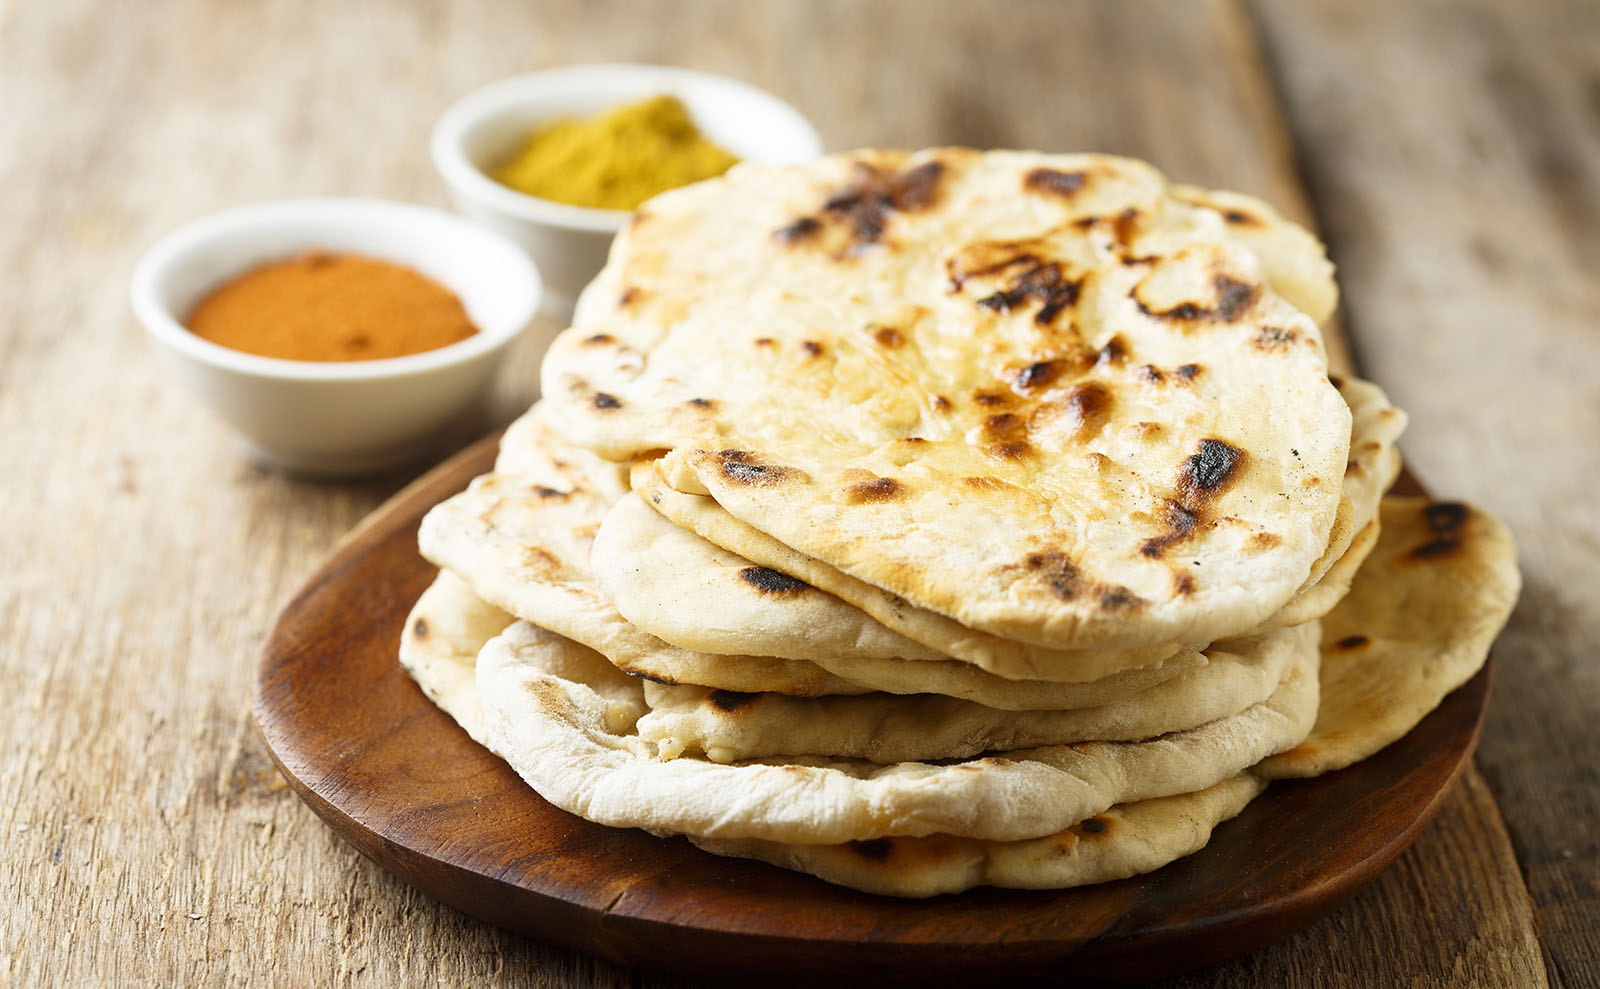 pieces on naan bread in a basket